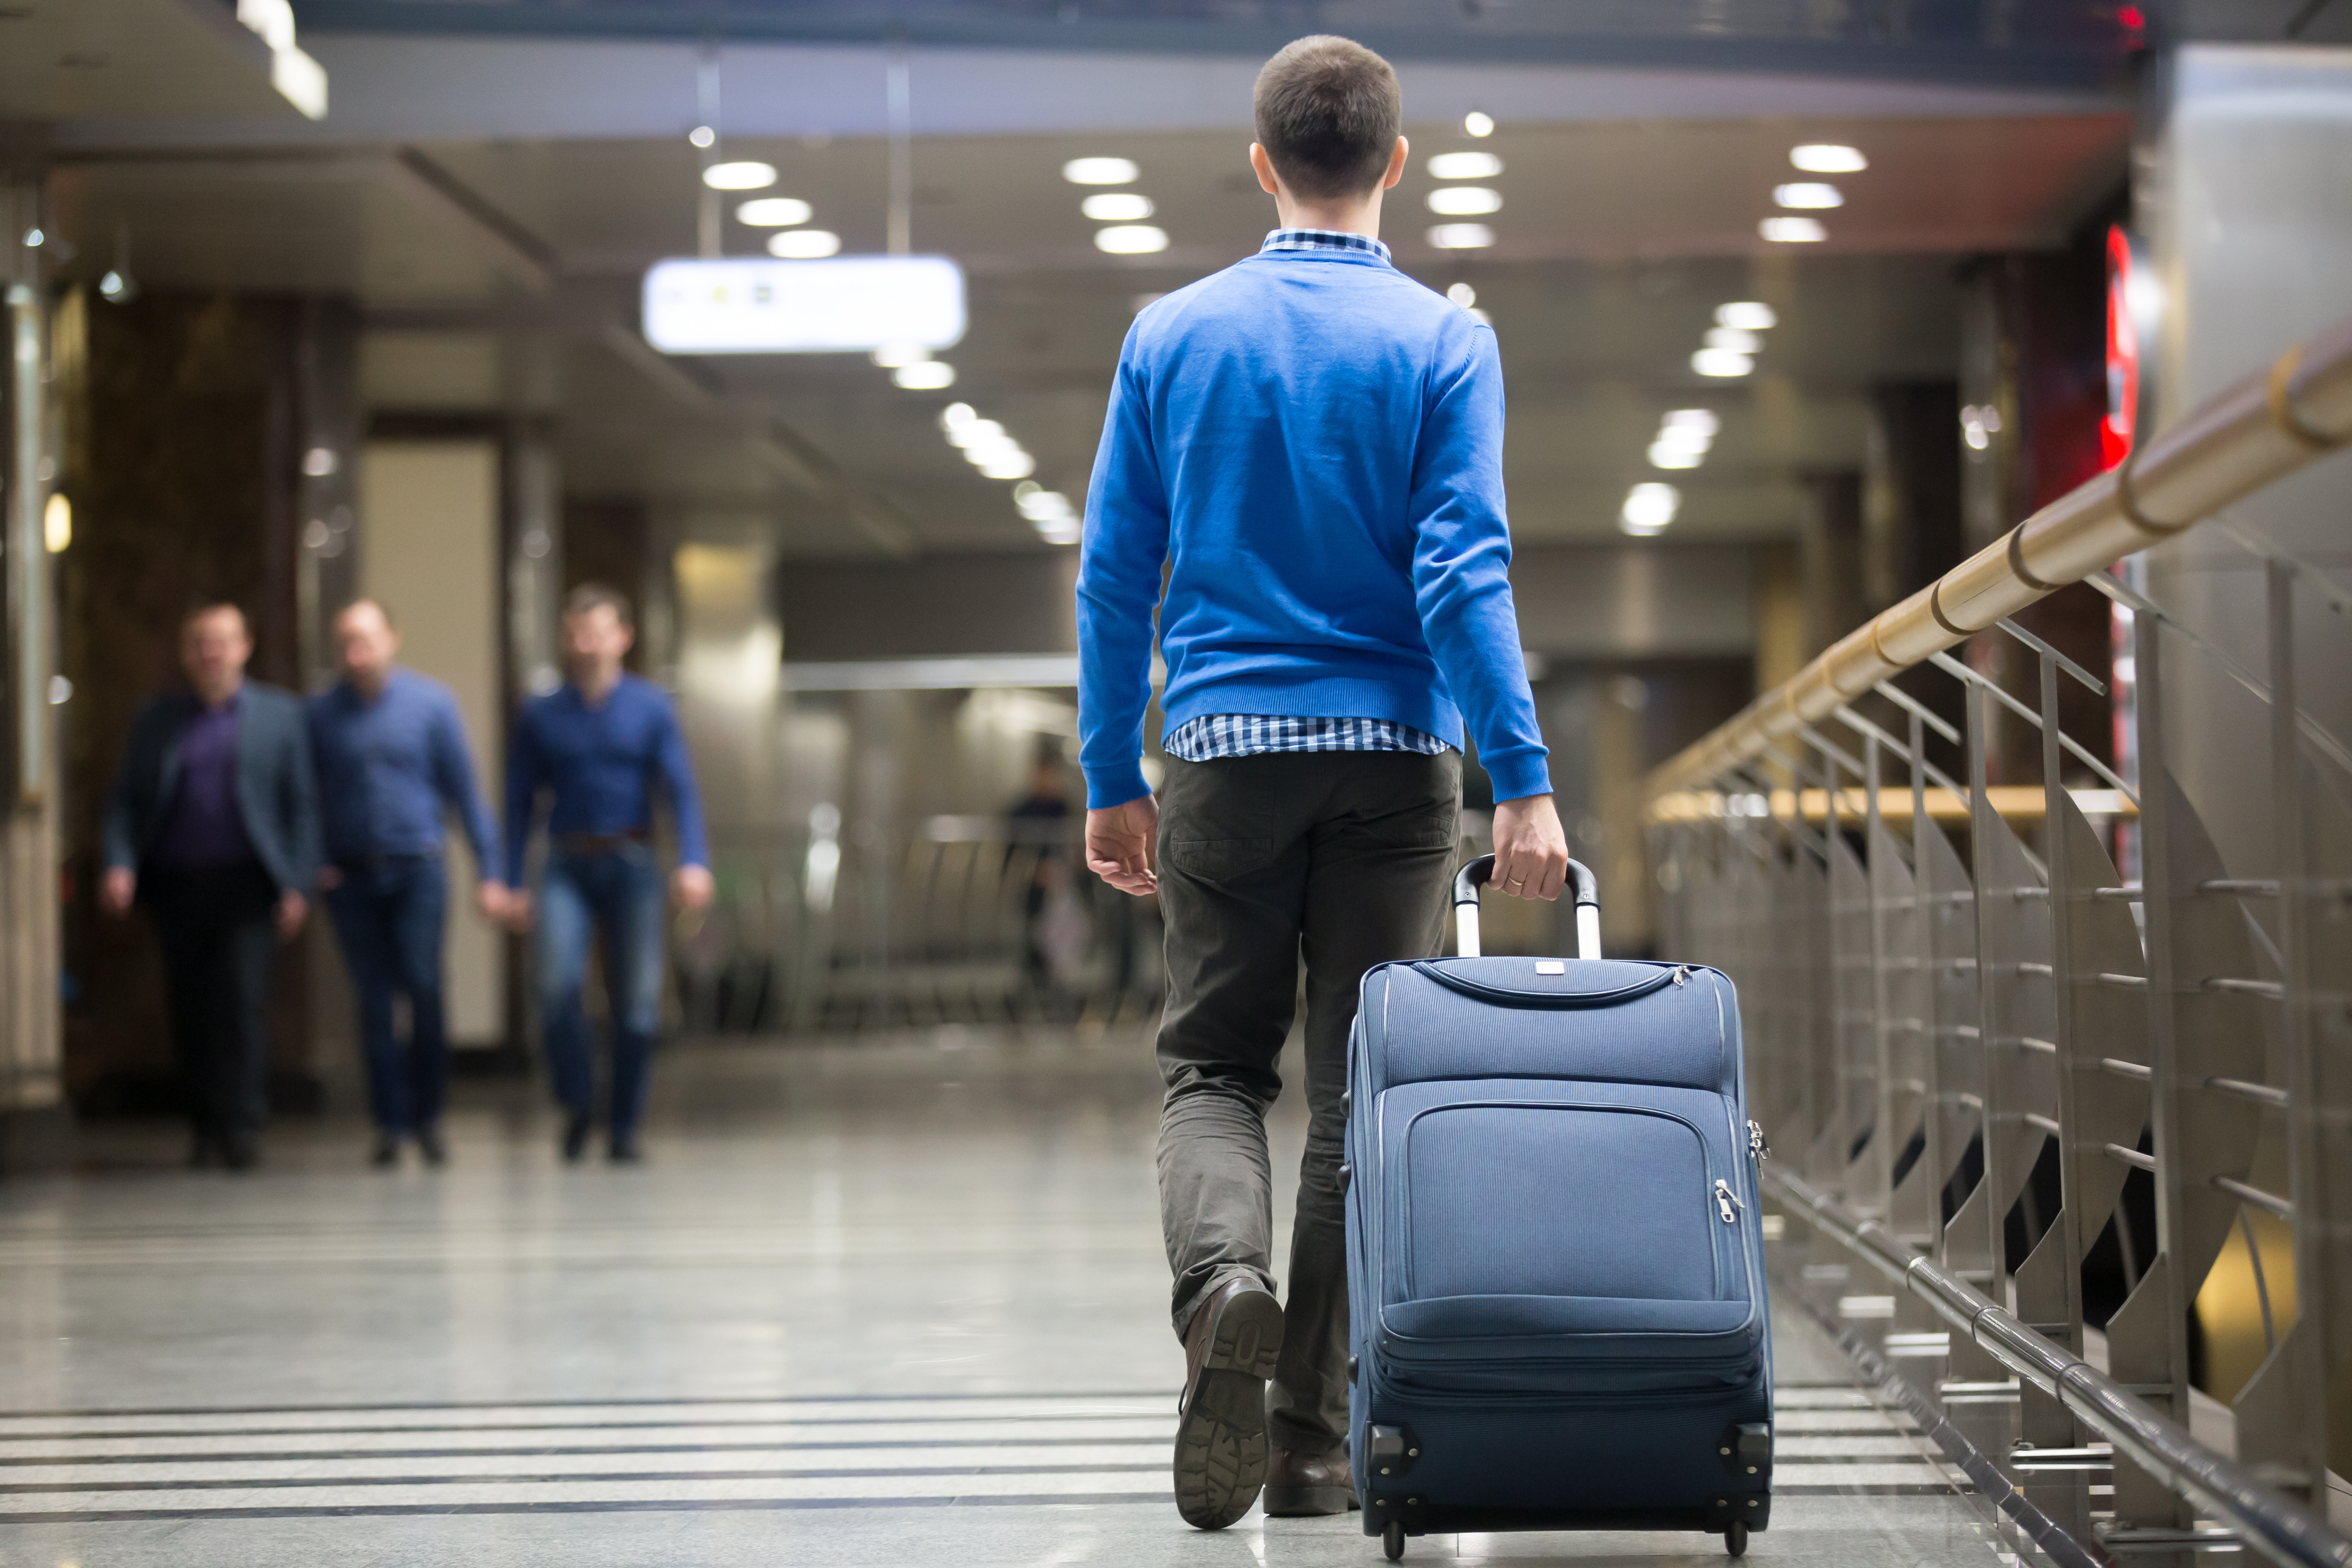 Man walking with his luggage in an airport | Source: Shutterstock